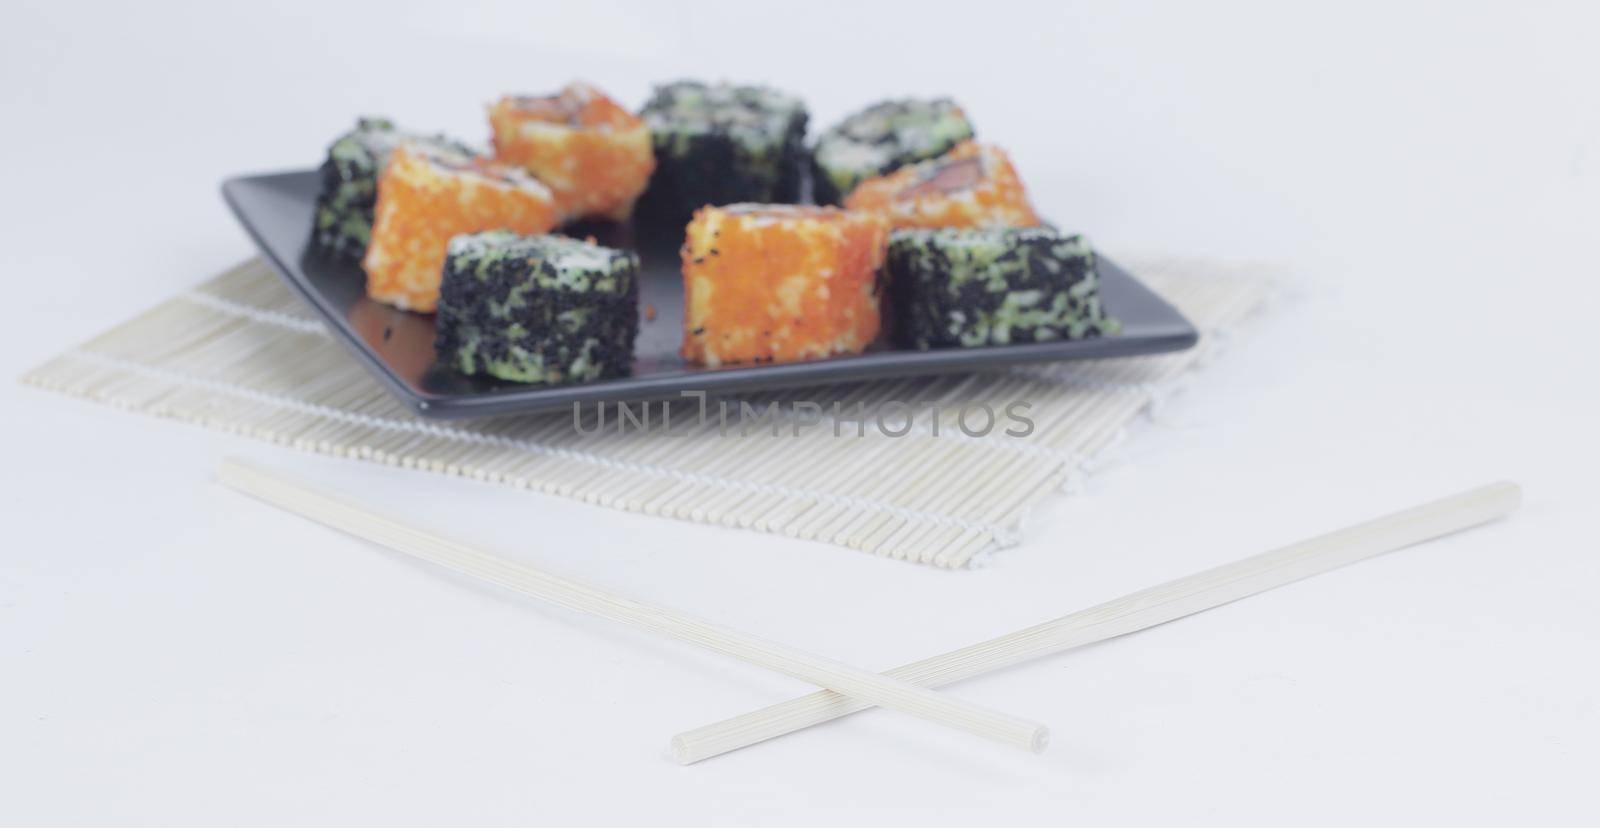 different types of Maki sushi on a black plate.isolated on white background